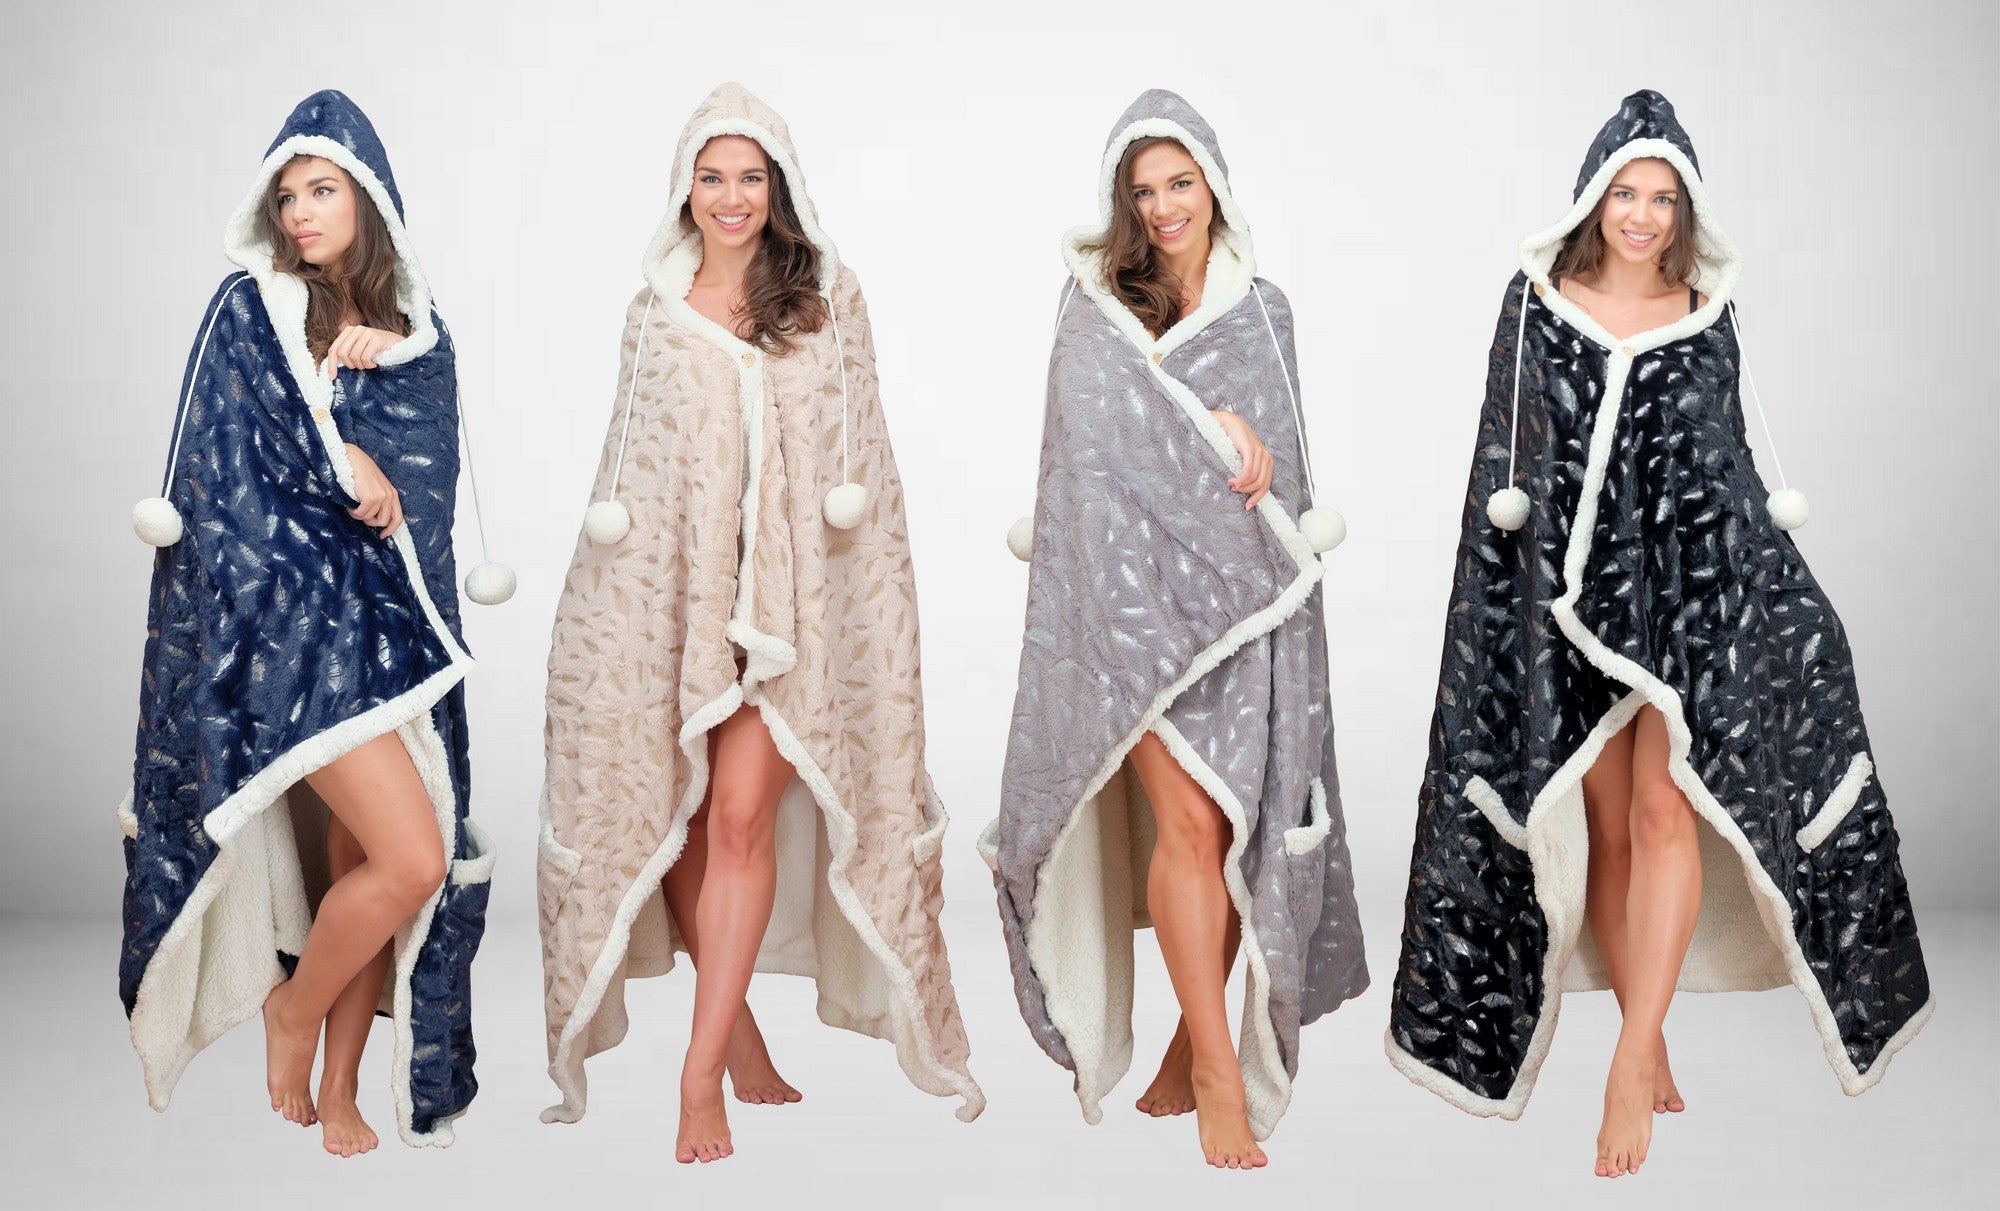 Chic Home Ansen Snuggle Hoodie Leaf Pattern Metallic Print Robe Cozy Super Soft Ultra Plush Micromink Sherpa Lined Wearable Blanket with 2 Pockets Hood Button Closure - 51x71”